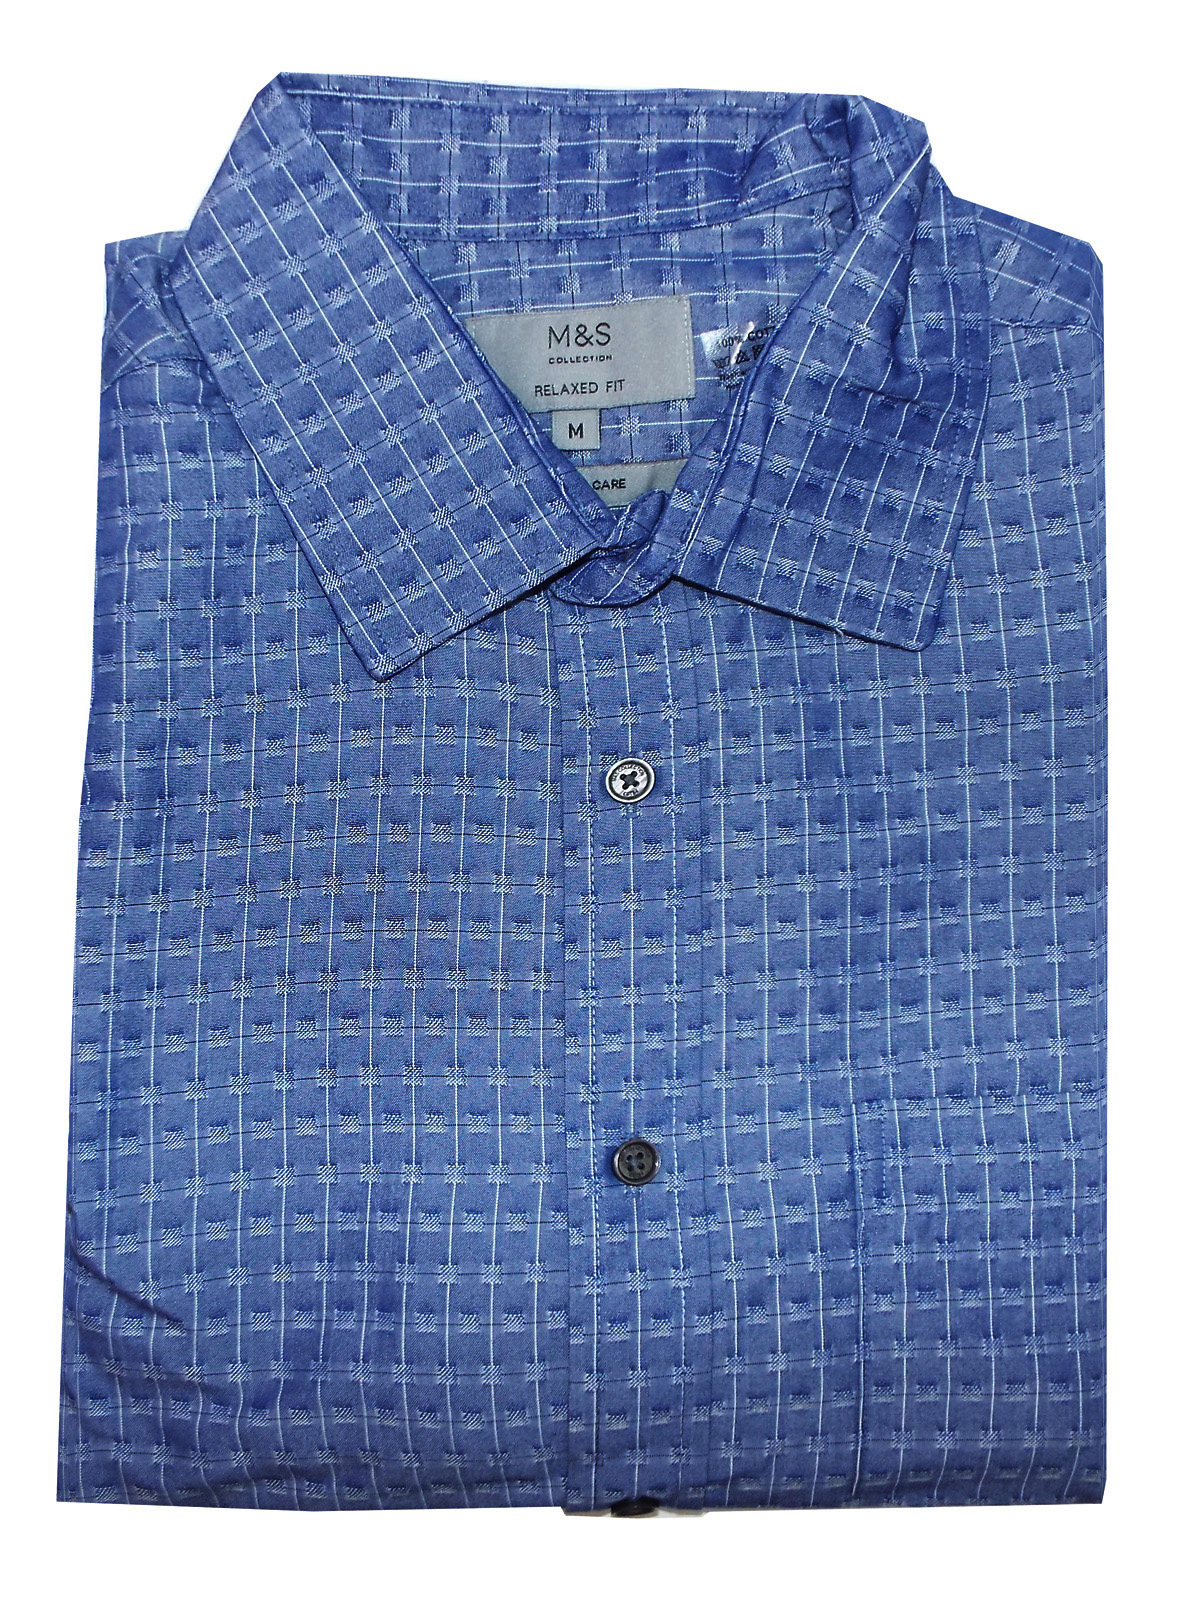 Marks and Spencer - - M&5 BLUE Mens Pure Cotton Relaxed Fit Checked ...